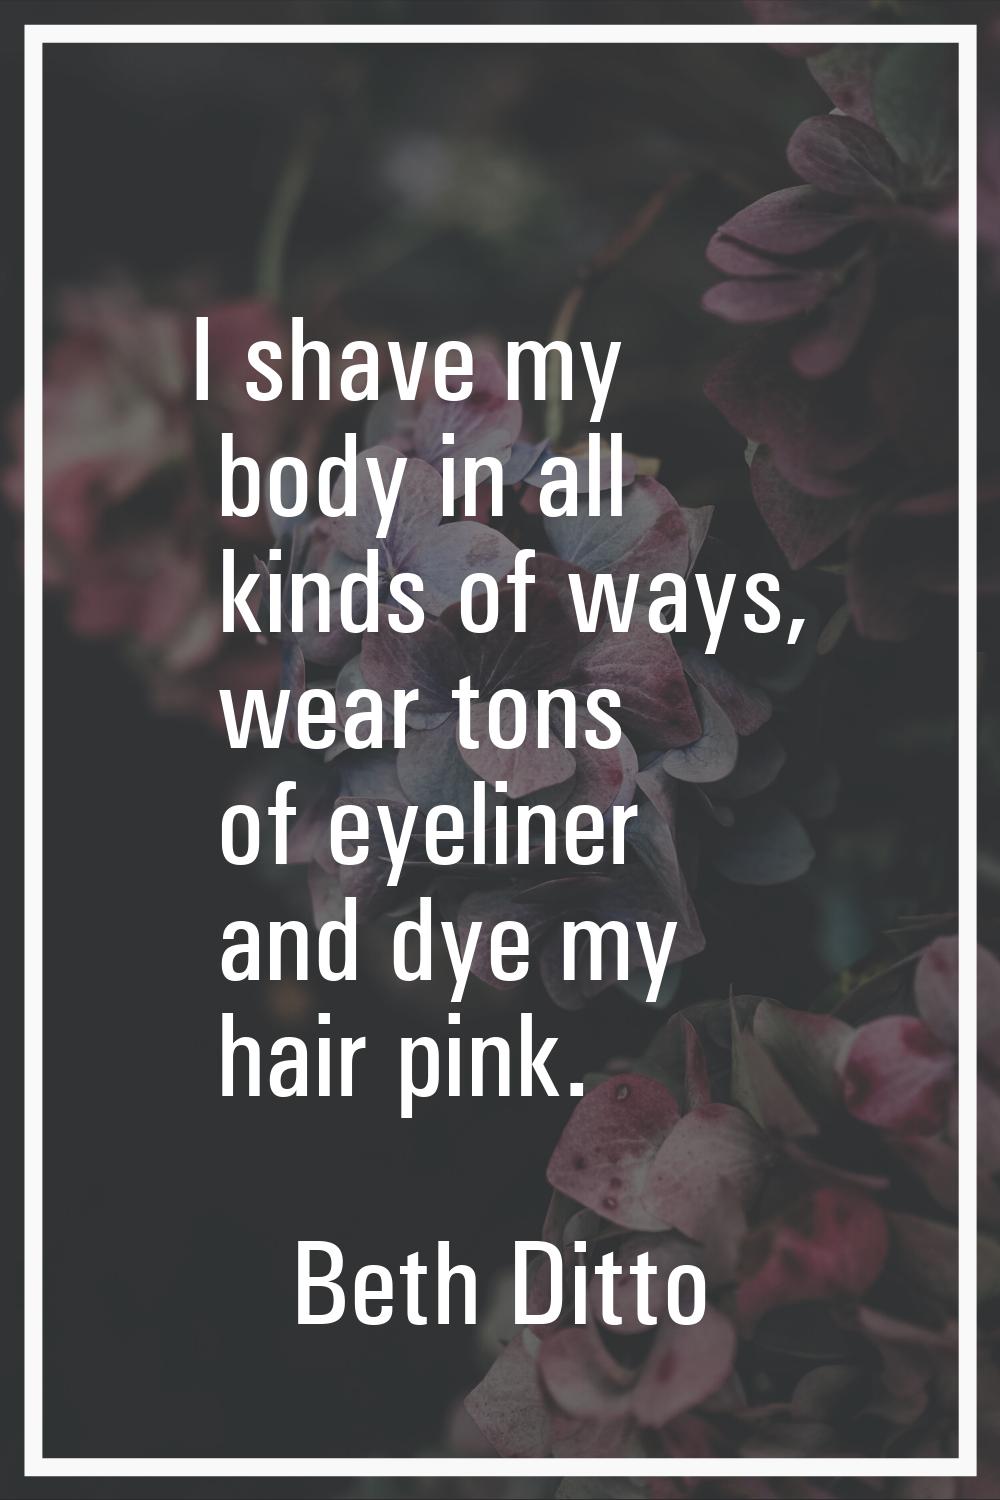 I shave my body in all kinds of ways, wear tons of eyeliner and dye my hair pink.